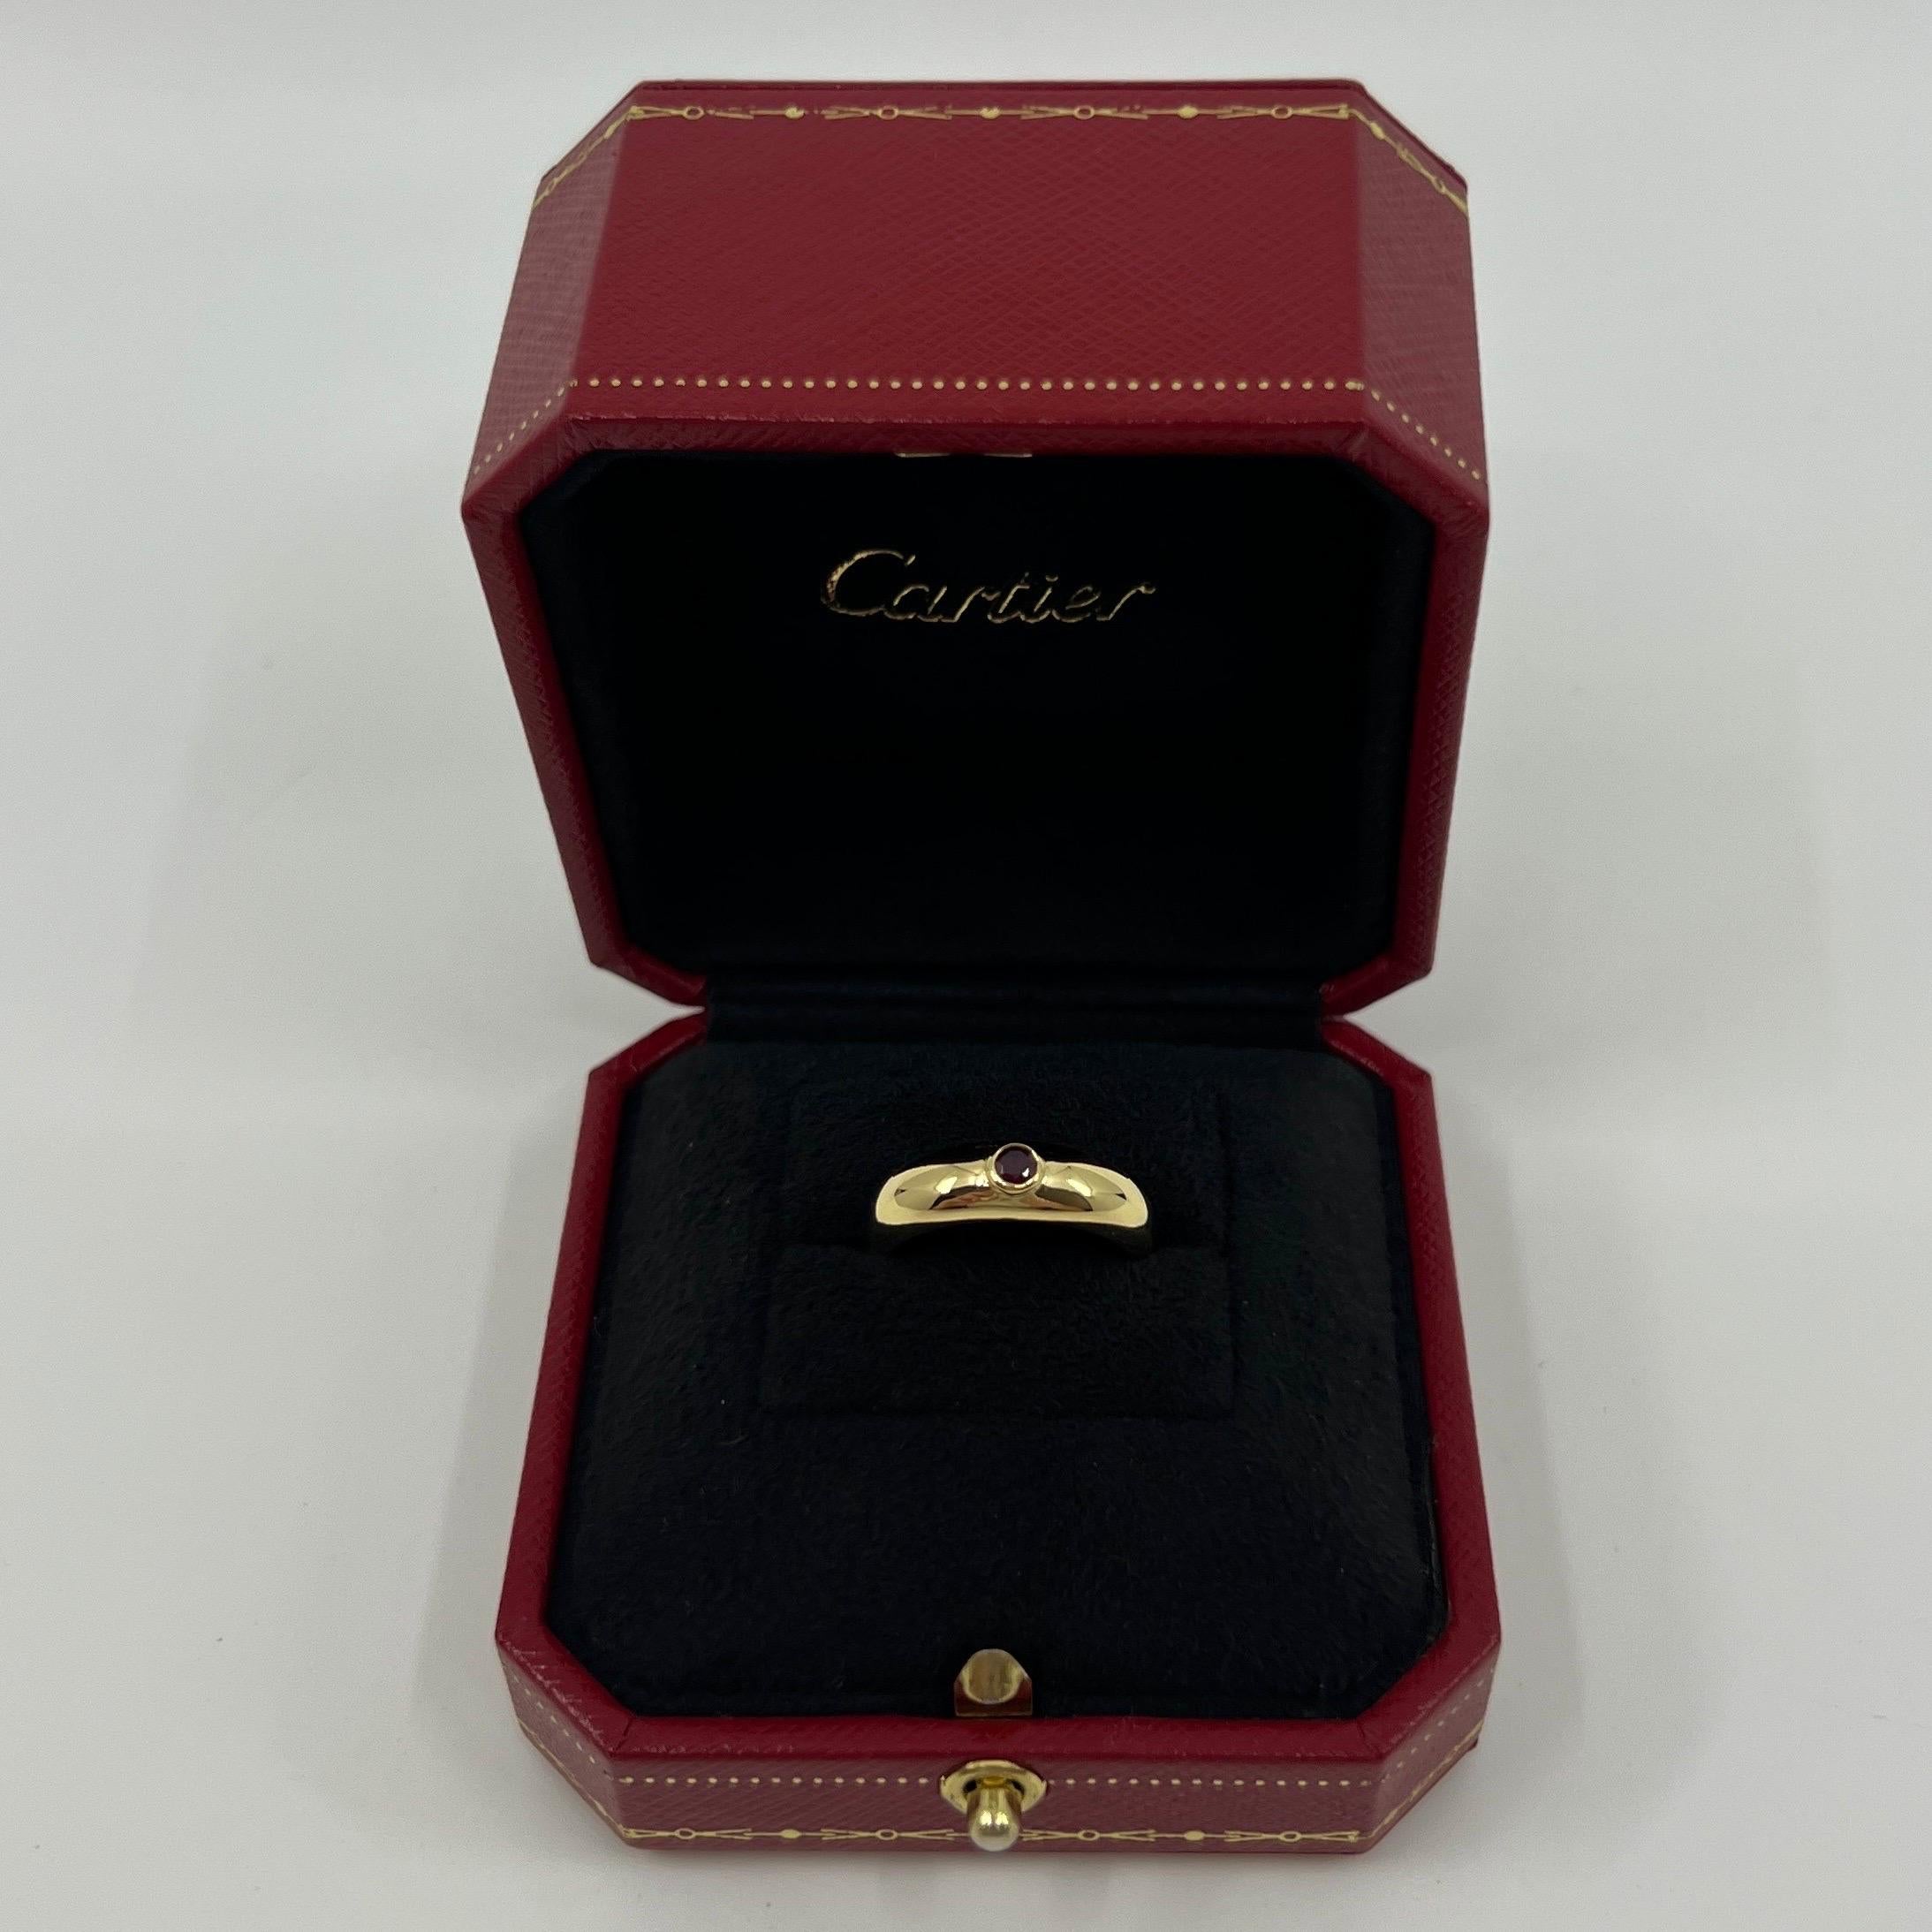 Vintage Cartier Round Cut Red Ruby Signet Style 18k Yellow Gold Domed Ring.

Stunning yellow gold Cartier ring set with a beautiful 3mm flush set round cut natural ruby with a beautiful deep red colour and an excellent cut.
Fine jewellery houses